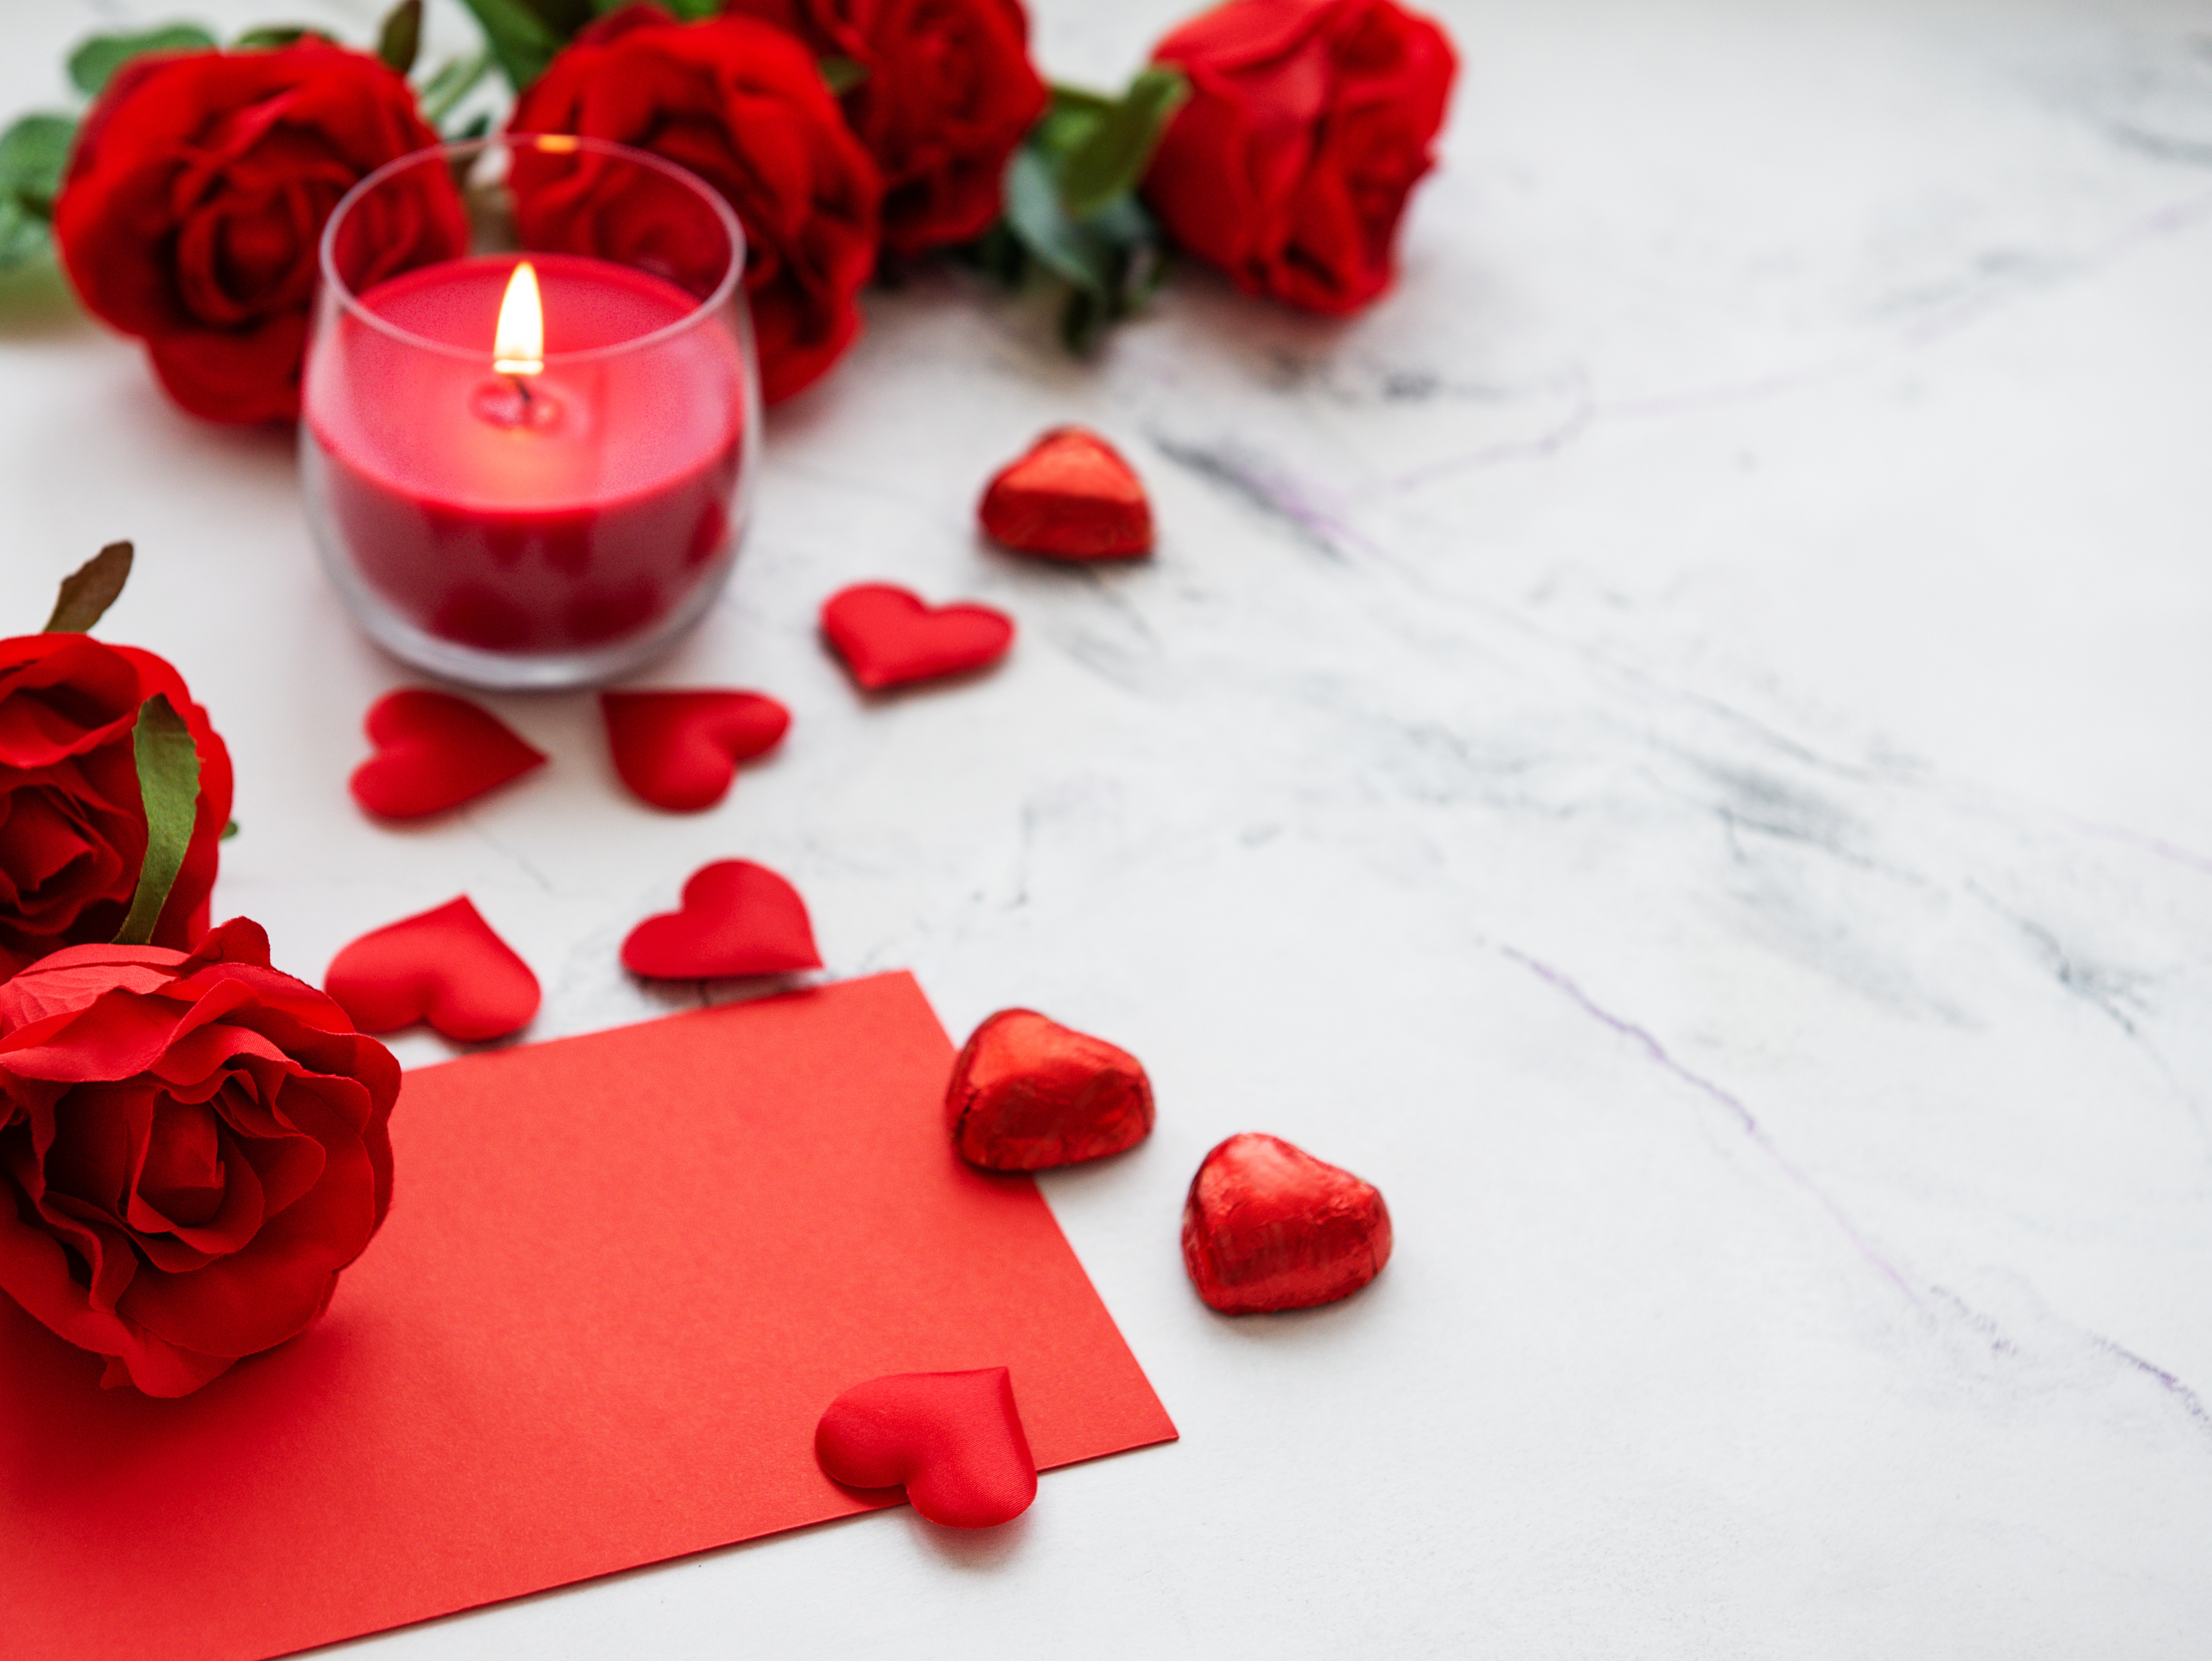 Candle Heart Shaped Red Flower Romantic Rose Wallpaper:4700x3529